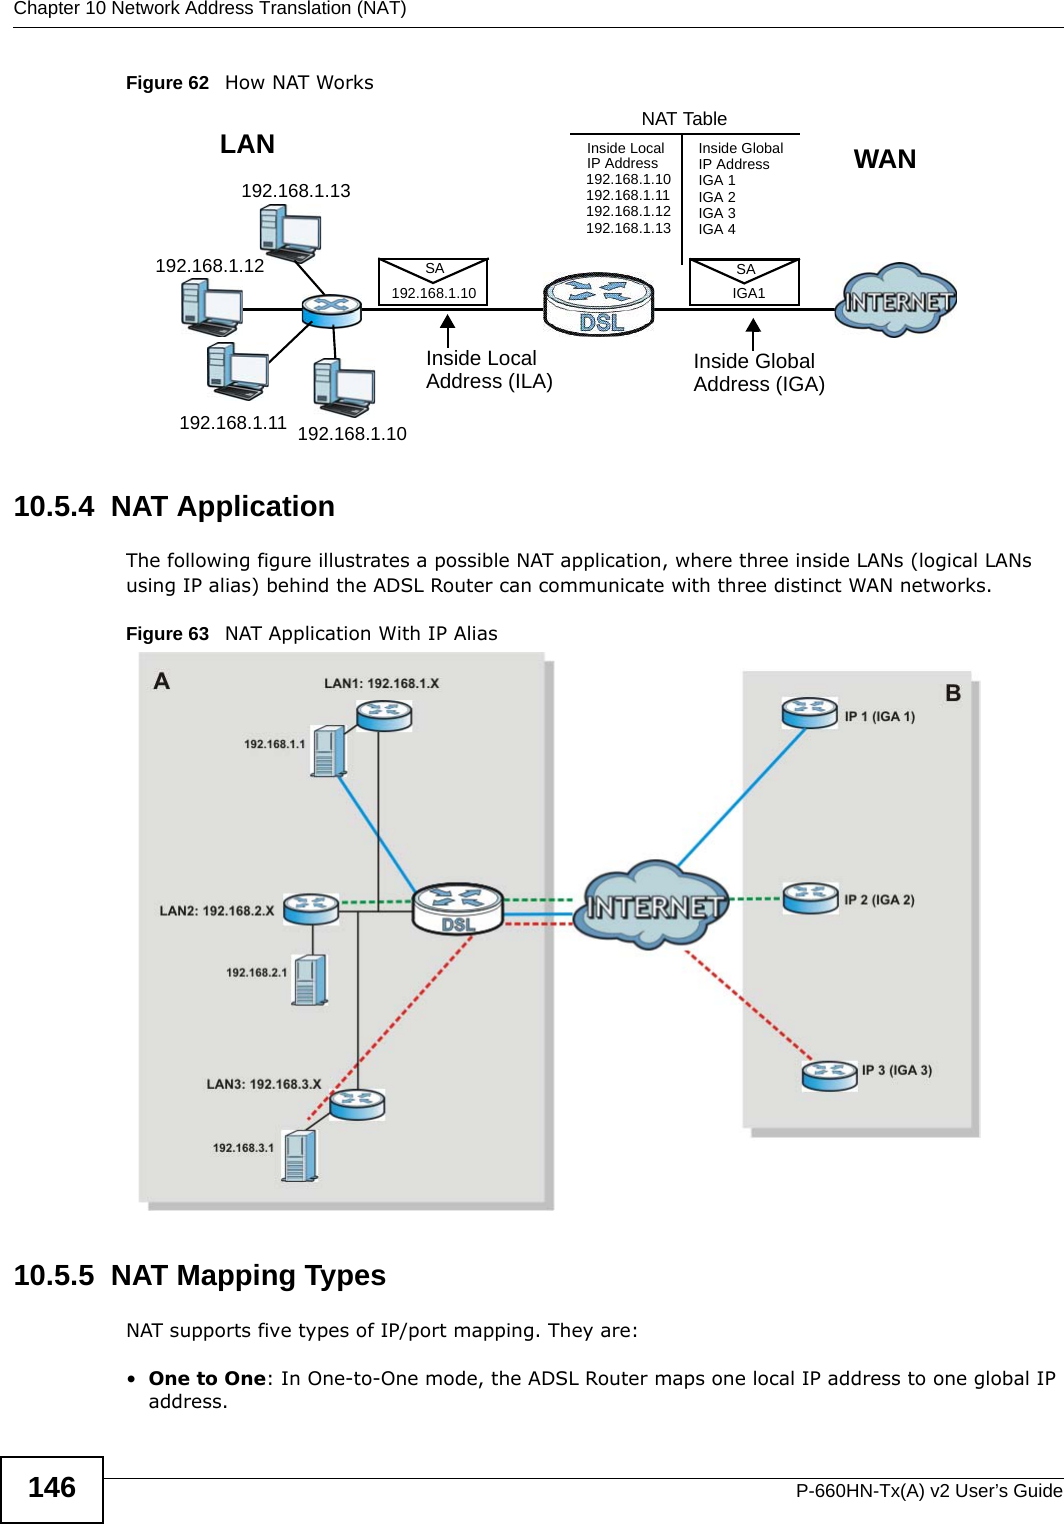 Chapter 10 Network Address Translation (NAT)P-660HN-Tx(A) v2 User’s Guide146Figure 62   How NAT Works10.5.4  NAT ApplicationThe following figure illustrates a possible NAT application, where three inside LANs (logical LANs using IP alias) behind the ADSL Router can communicate with three distinct WAN networks.Figure 63   NAT Application With IP Alias10.5.5  NAT Mapping TypesNAT supports five types of IP/port mapping. They are:•One to One: In One-to-One mode, the ADSL Router maps one local IP address to one global IP address.192.168.1.13192.168.1.10192.168.1.11192.168.1.12 SA192.168.1.10SAIGA1Inside LocalIP Address192.168.1.10192.168.1.11192.168.1.12192.168.1.13Inside Global IP AddressIGA 1IGA 2IGA 3IGA 4NAT TableWANLANInside LocalAddress (ILA) Inside GlobalAddress (IGA)